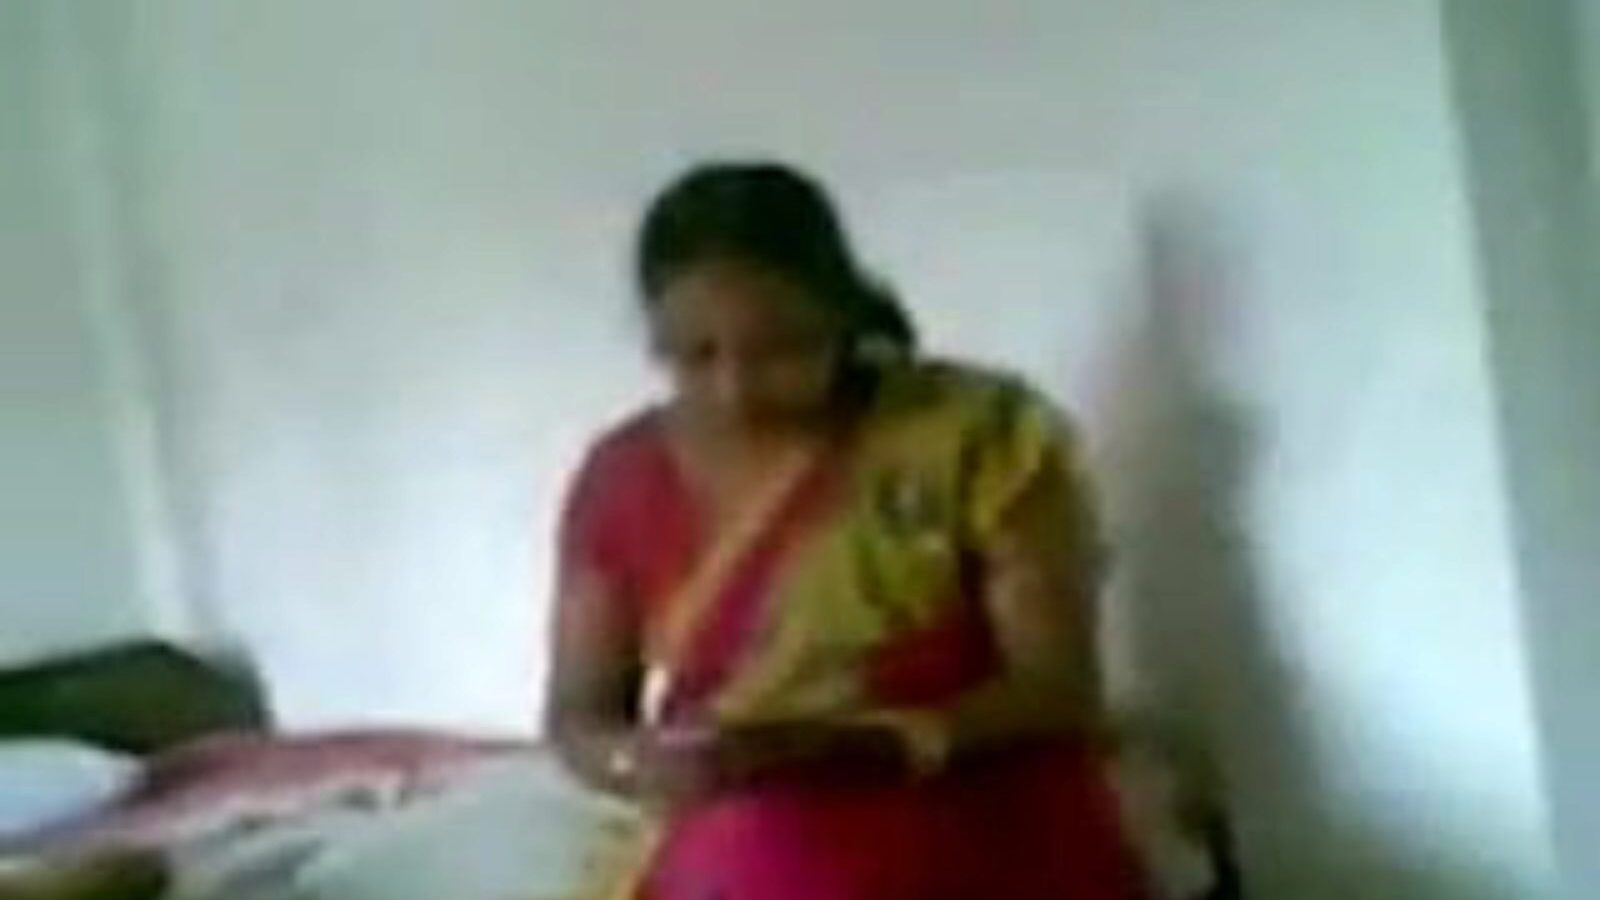 Ricky trained Lady instructor the knowledge of sex.mp4 Play any sex stance If you wish Indian hotties u should likewise do this. Knowledge of each intercourse position This Ricky keeps his full attention. gives respect to all Indian sweethearts Call +919650372075